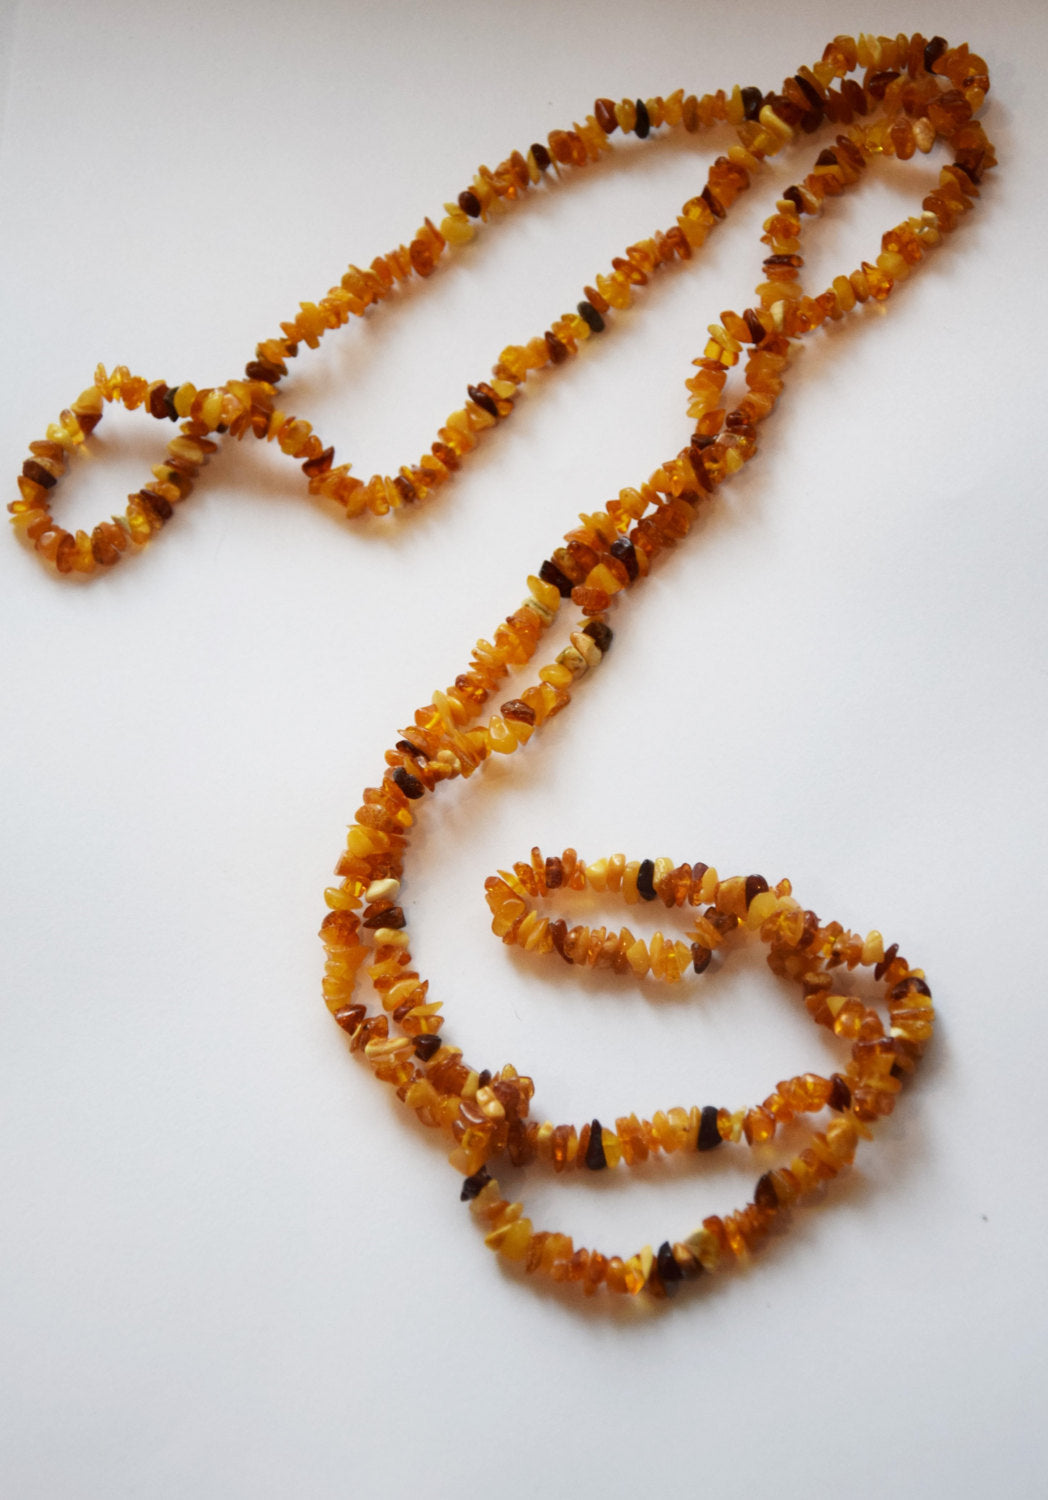 Amber necklace, long amber necklace 